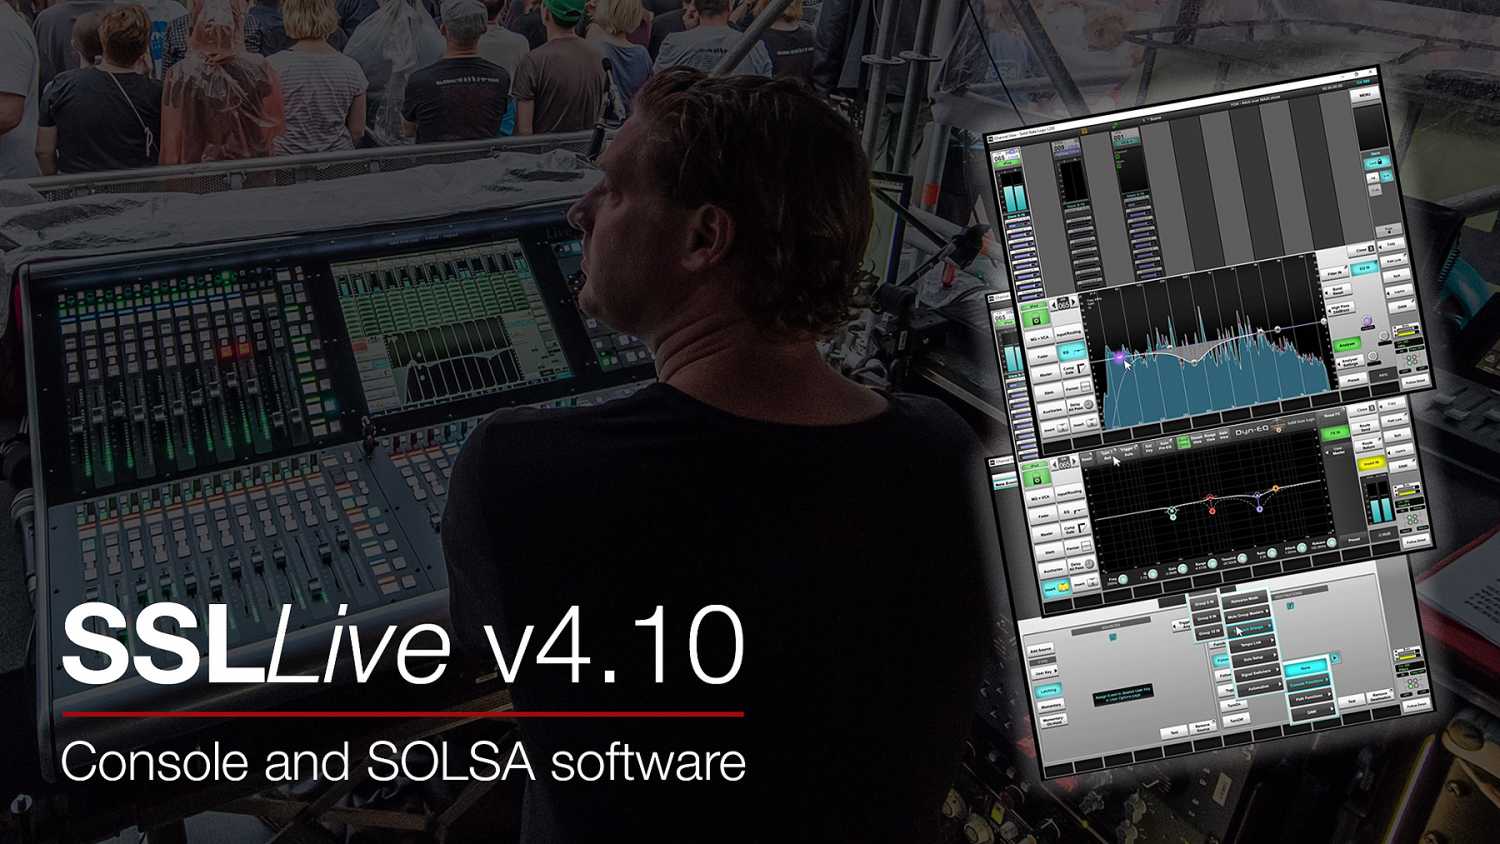 The latest Live V4.10 update for the entire range of SSL Live consoles is available now